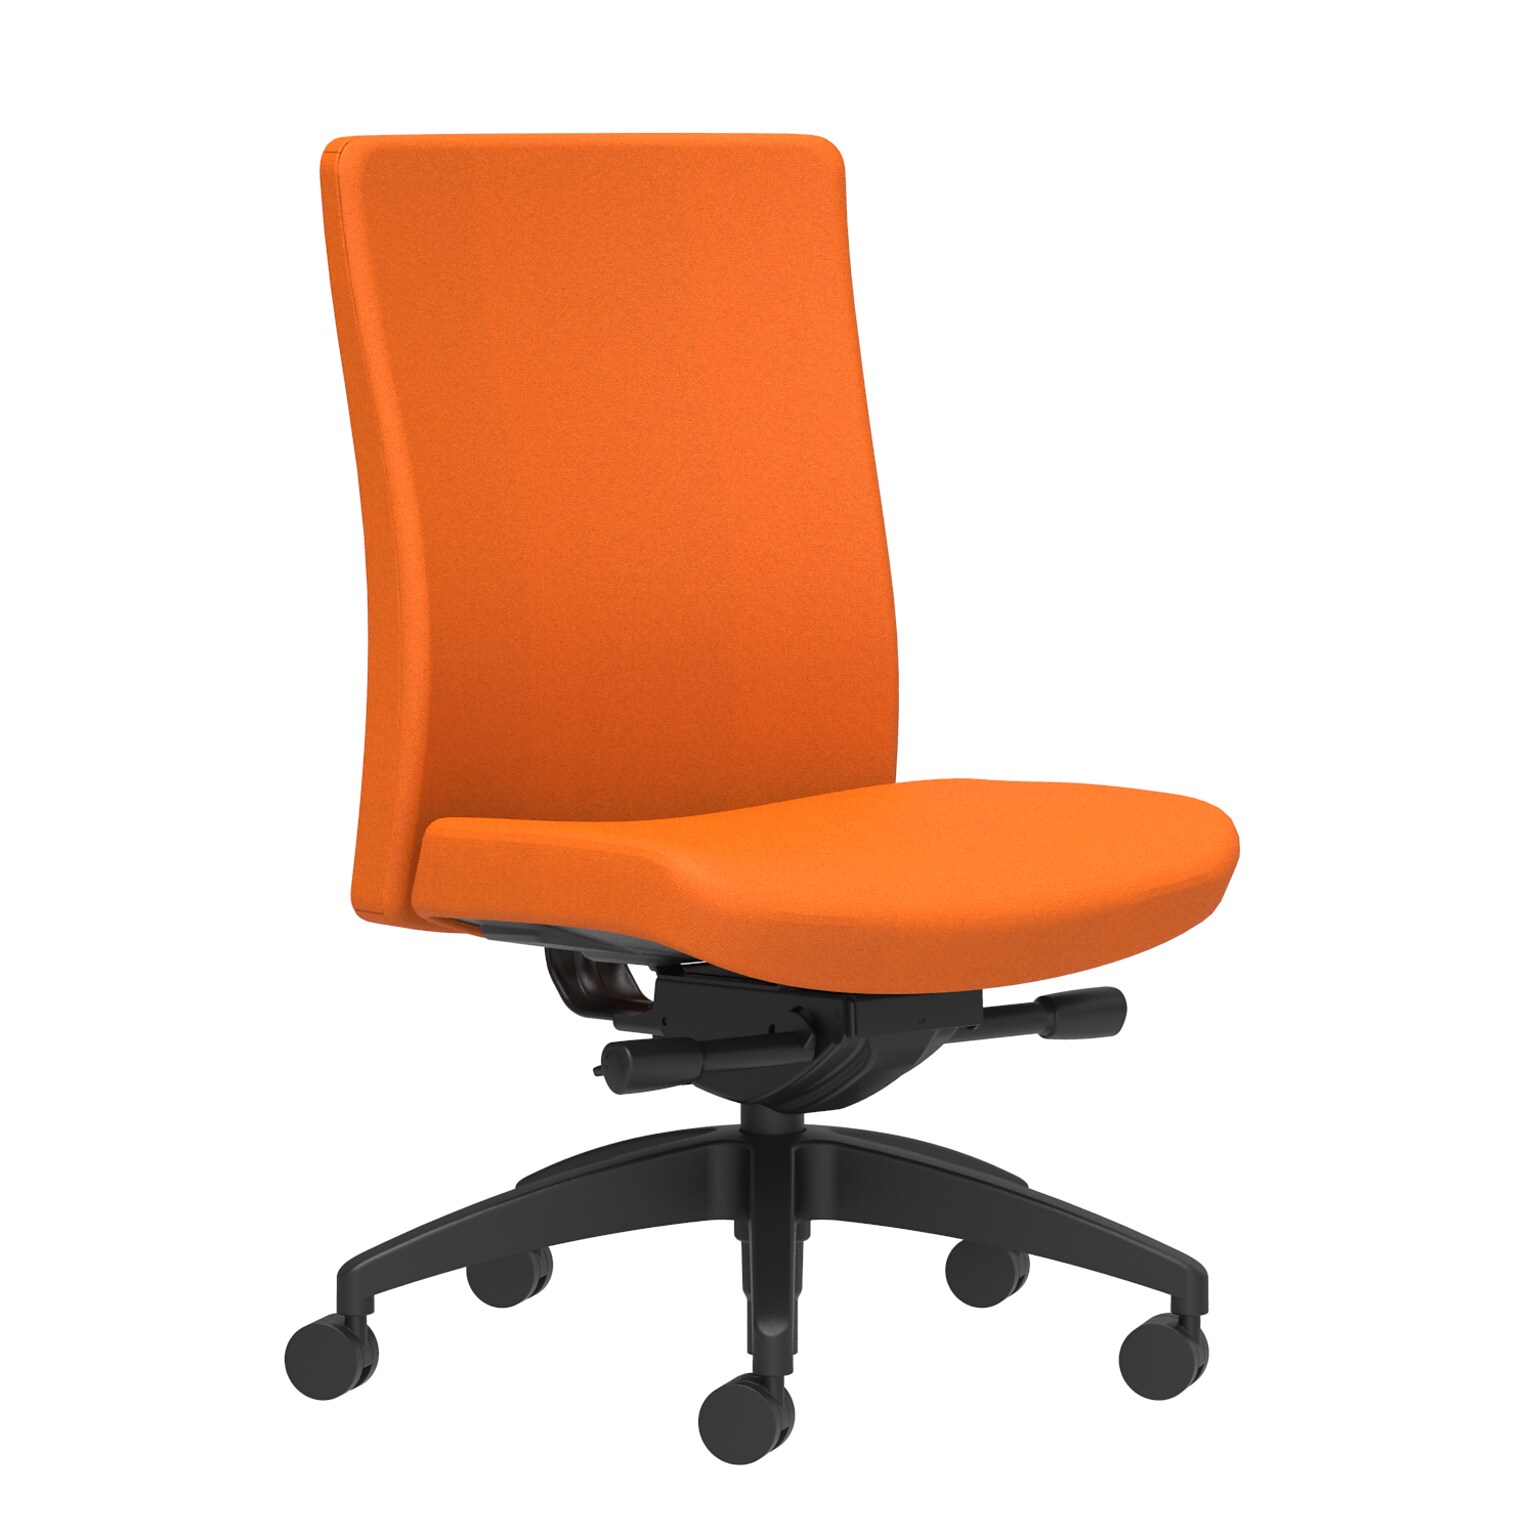 Union & Scale Workplace2.0™ Task Chair Upholstered, Armless, Apricot Fabric, Synchro Tilt Seat Slide (54193)